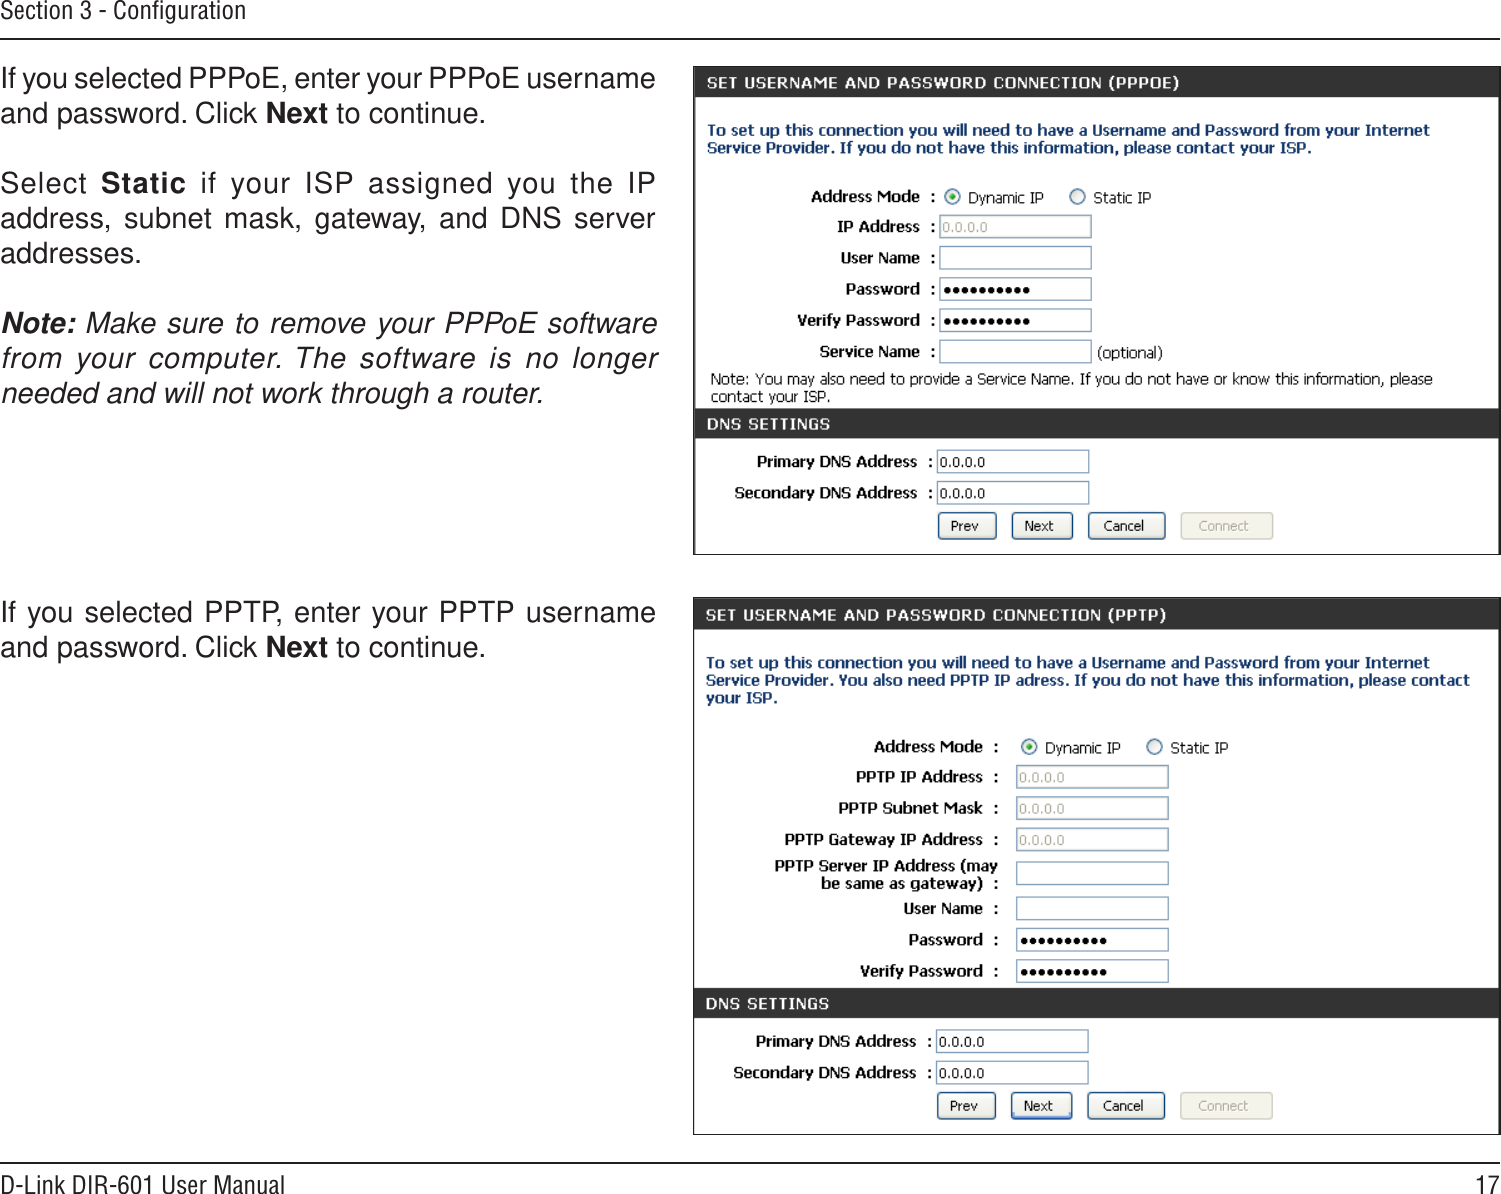 17D-Link DIR-601 User ManualSection 3 - ConﬁgurationIf you selected PPTP, enter your PPTP username and password. Click Next to continue.If you selected PPPoE, enter your PPPoE username and password. Click Next to continue.Select  Static  if  your  ISP  assigned  you  the  IP address, subnet mask, gateway, and DNS server addresses.Note: Make sure to remove your PPPoE software from your computer. The software is no longer needed and will not work through a router.